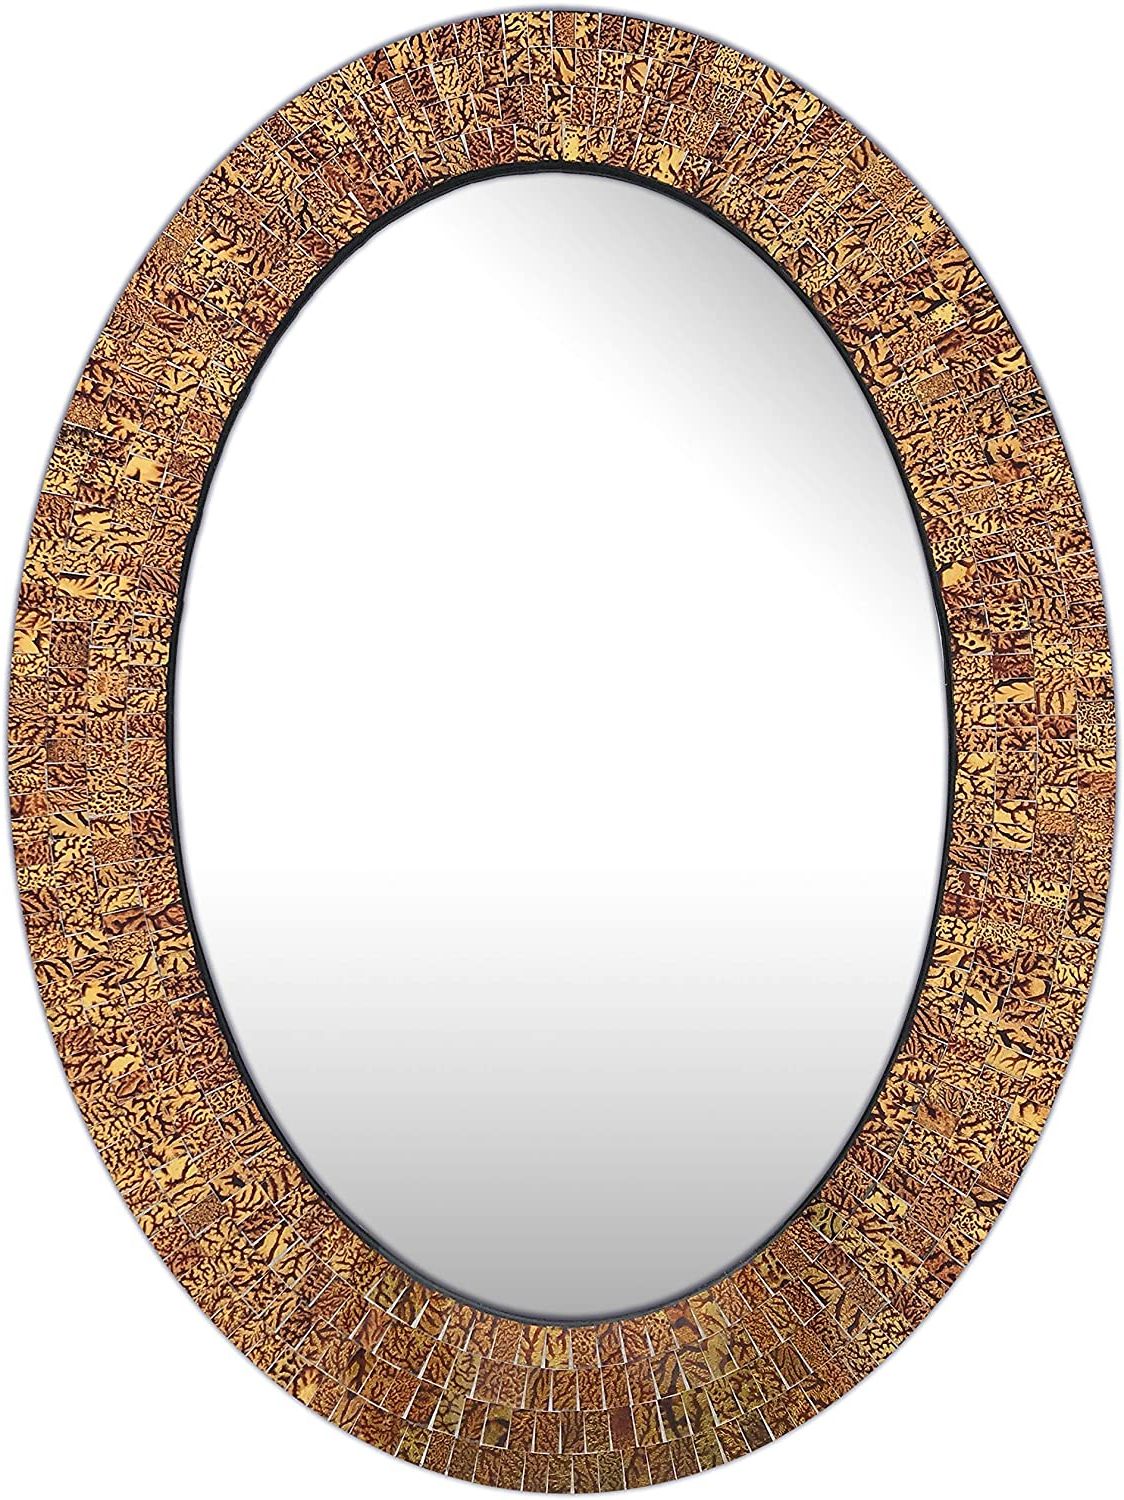 Wooden Oval Wall Mirrors Within Well Liked Decorshore Traditional Decorative Mosaic Mirror – 32x24 In Oval Shape (View 15 of 15)